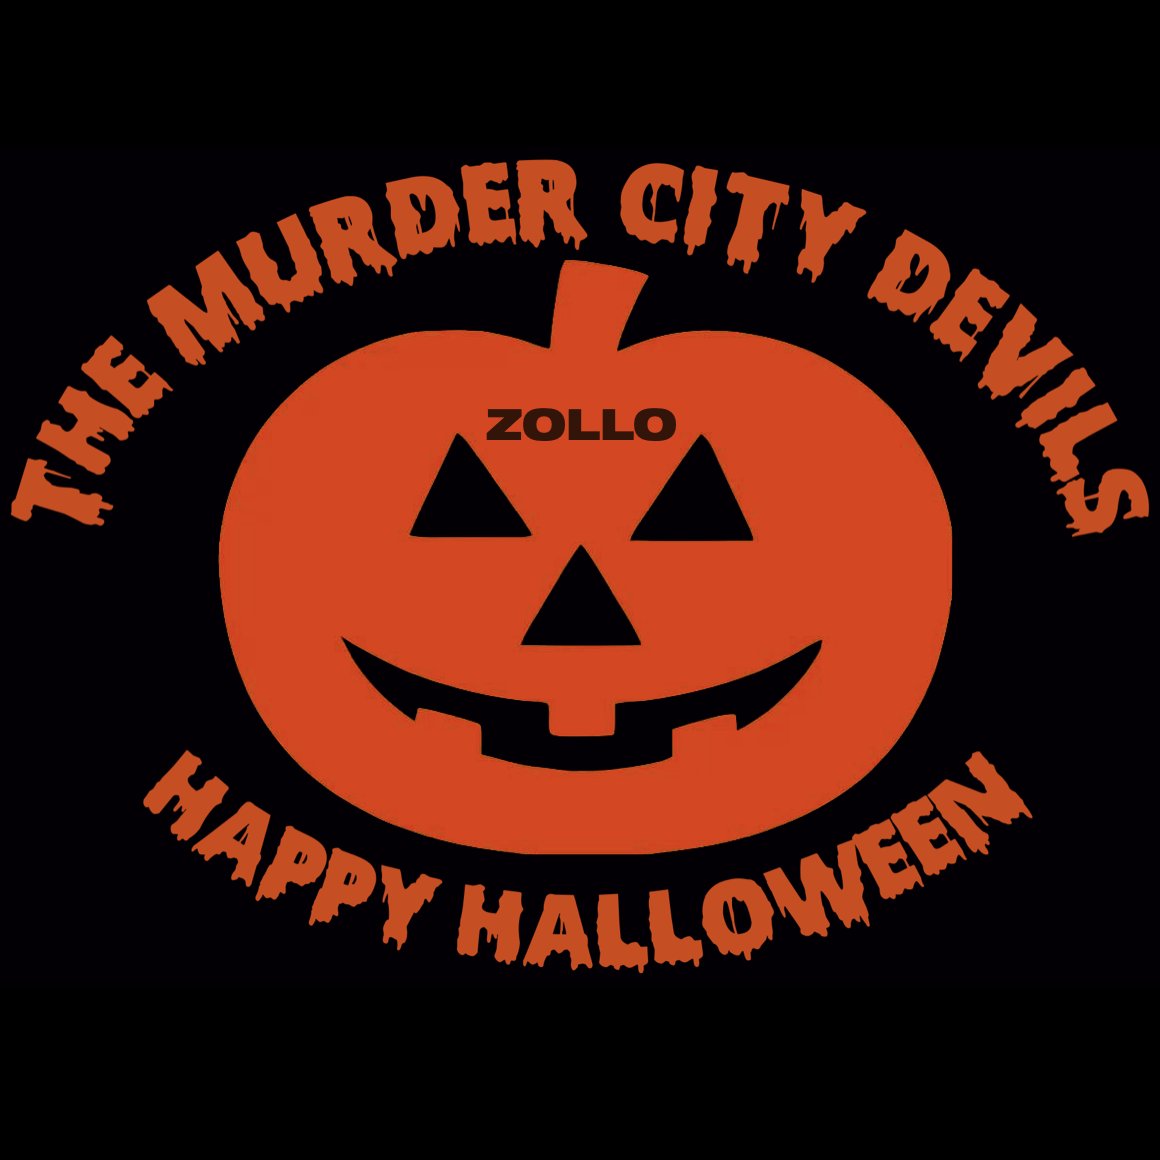 Black Happy Halloween Zollo Shirt - Large Only 